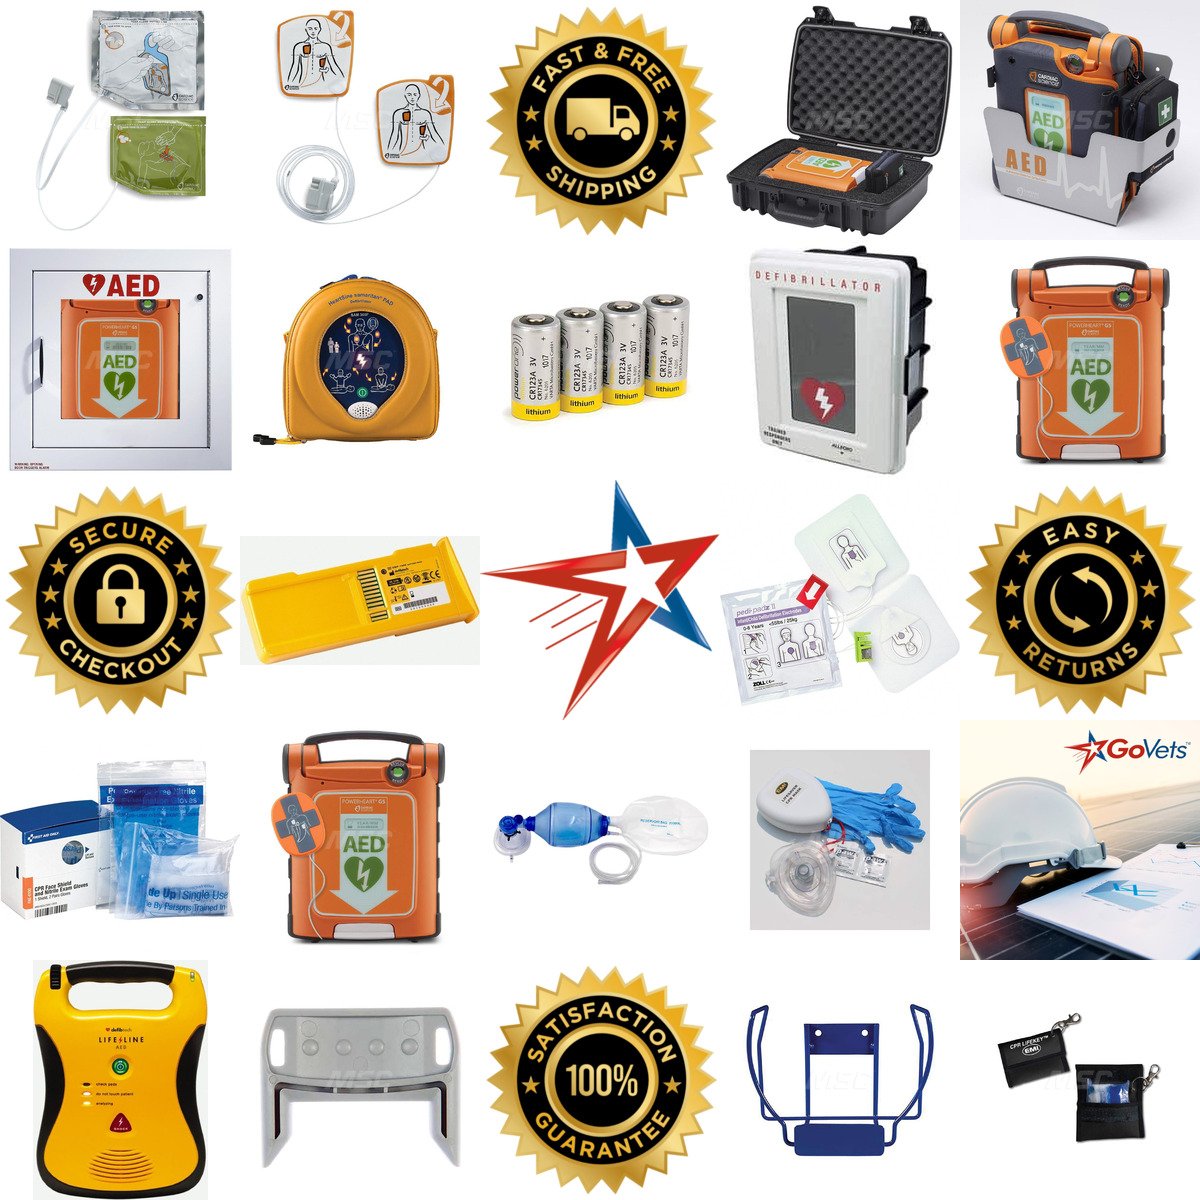 A selection of Aed and Resuscitation products on GoVets